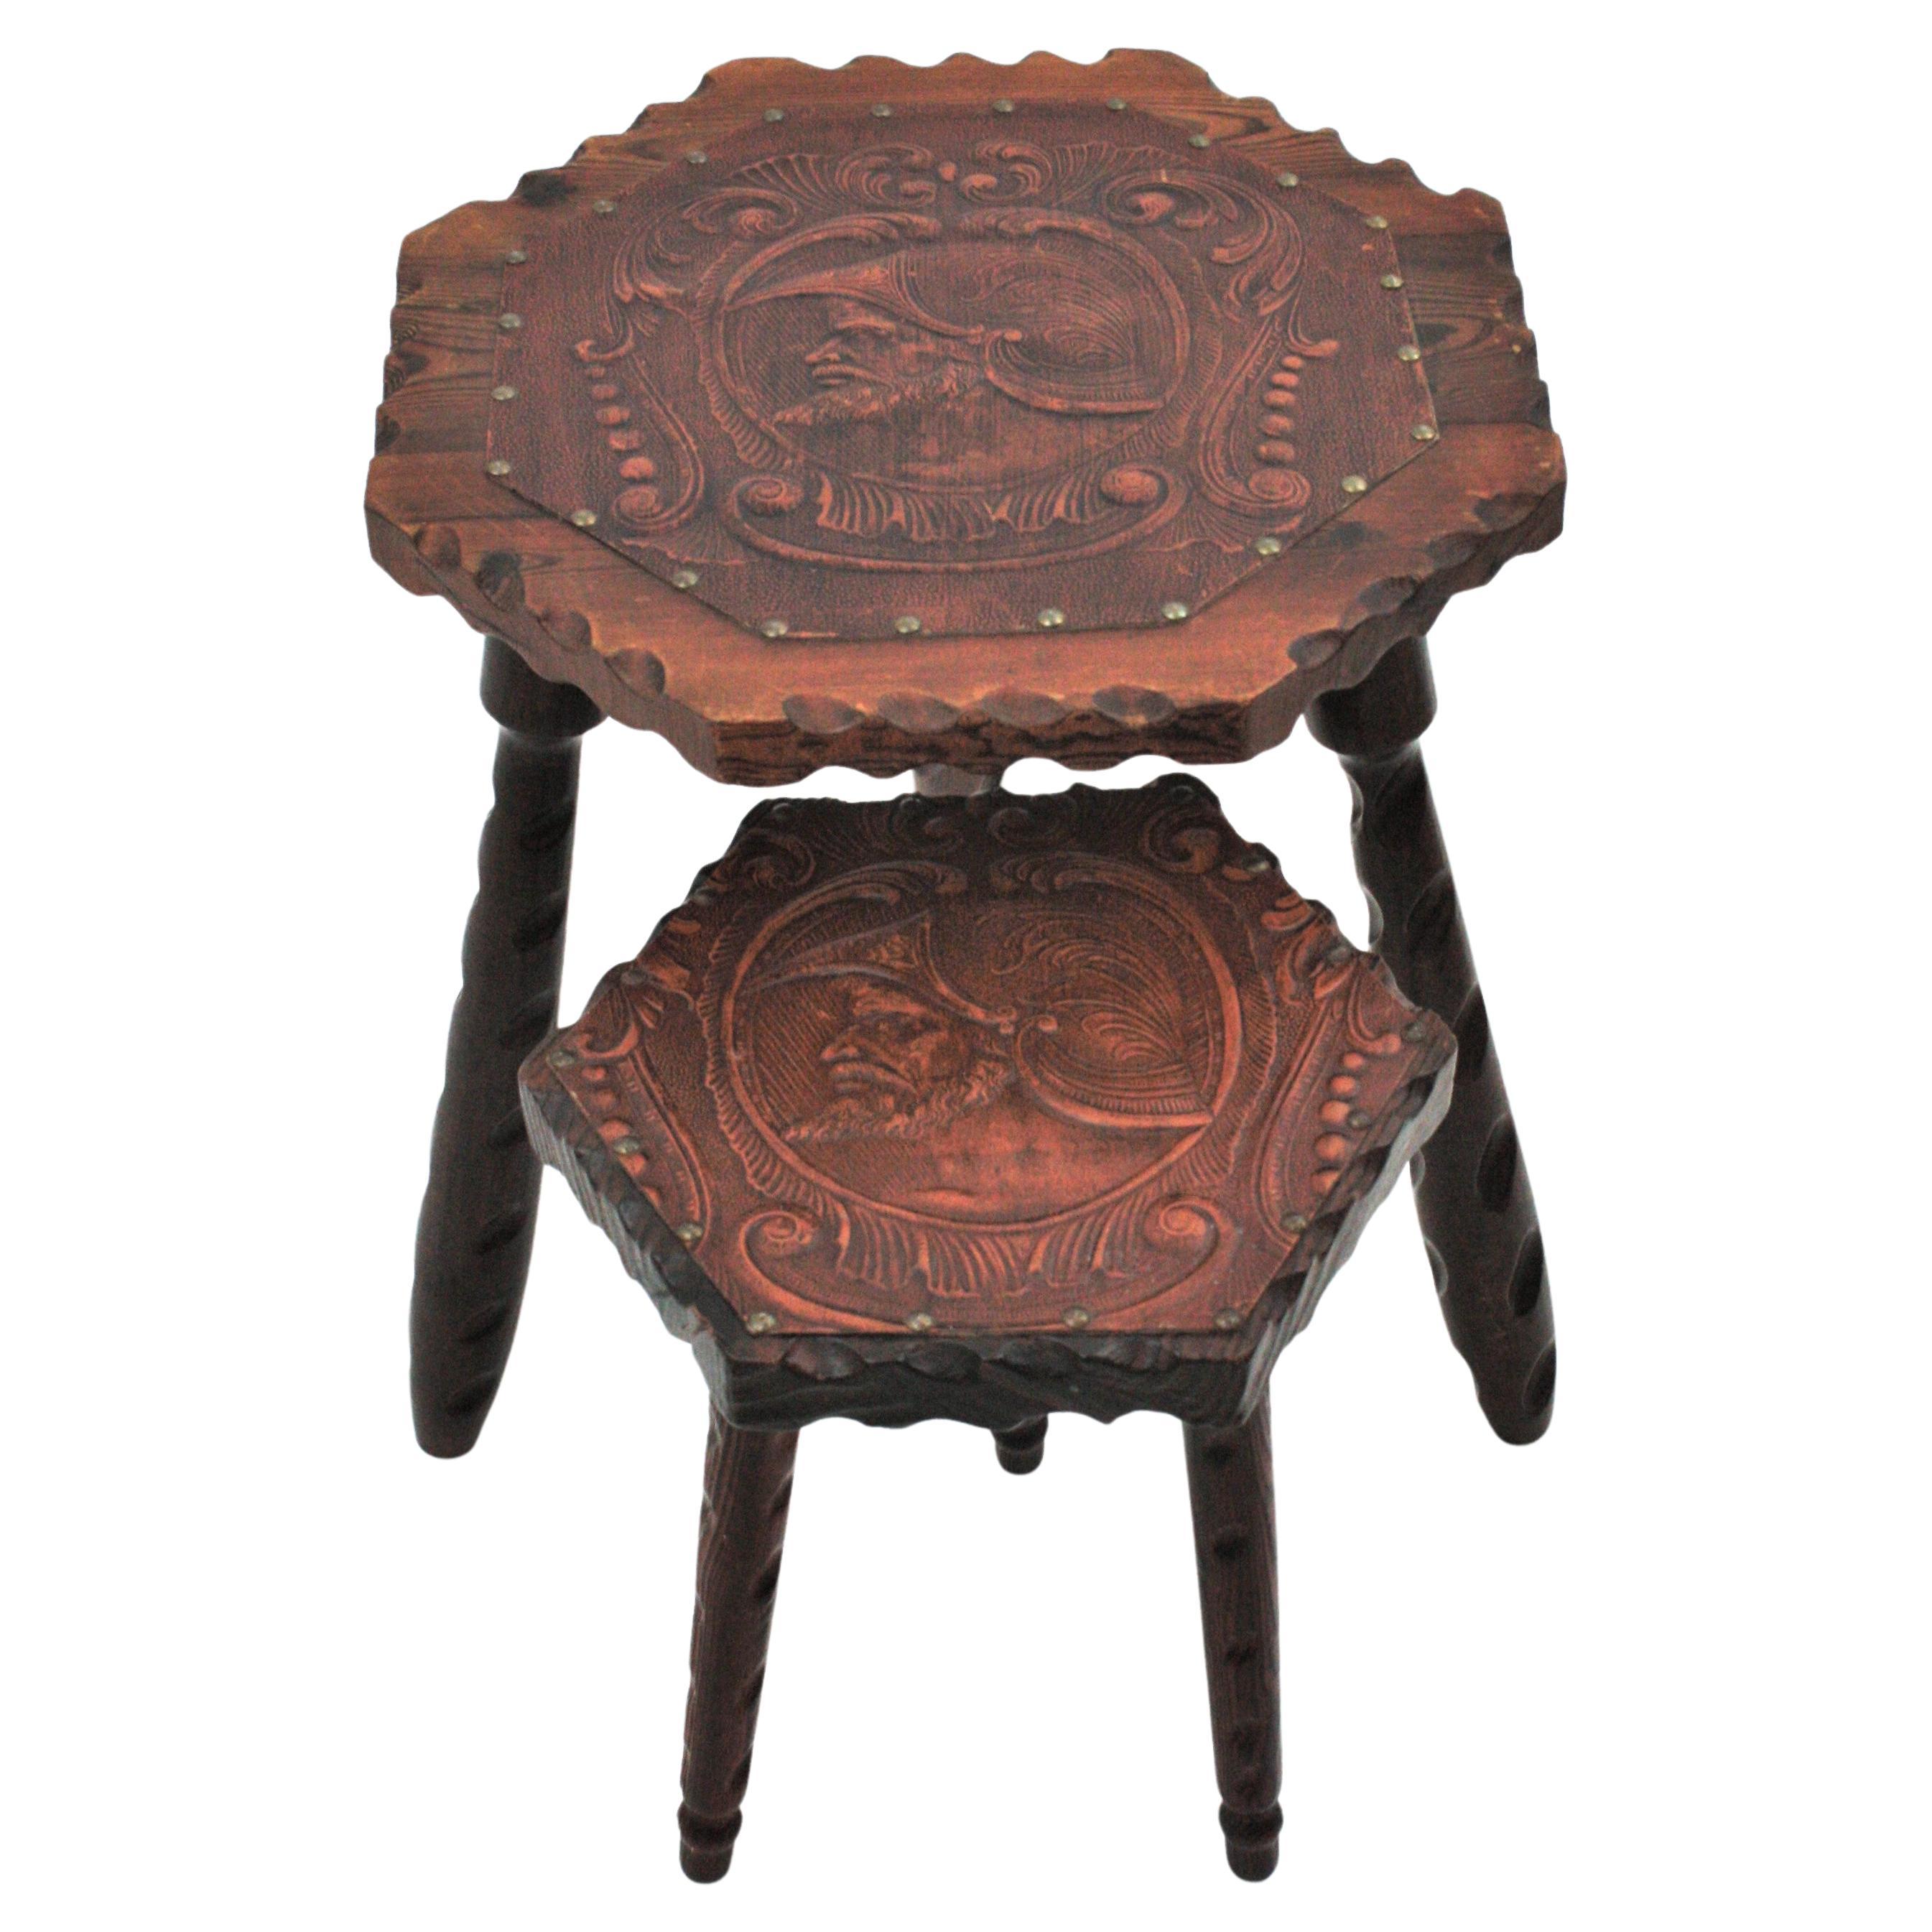 Pair of Spanish Colonial Hexagonal Side Tables, Carved Wood and Repousse Leather